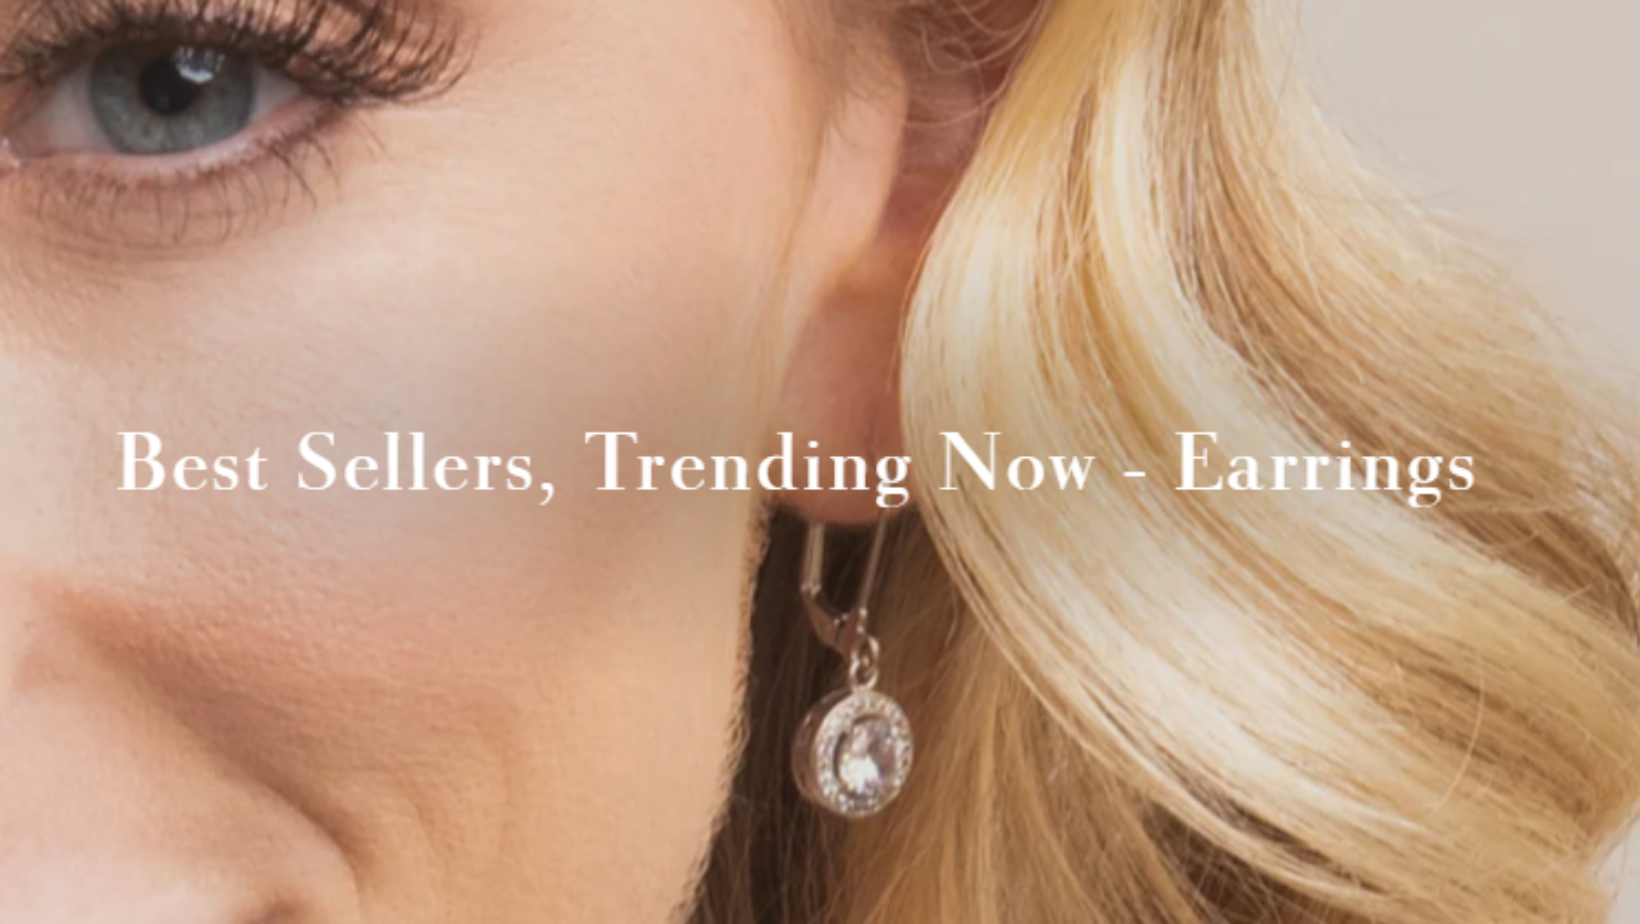 A Sparkle Story: Exploring the Most Popular Earrings from Cate & Chloe